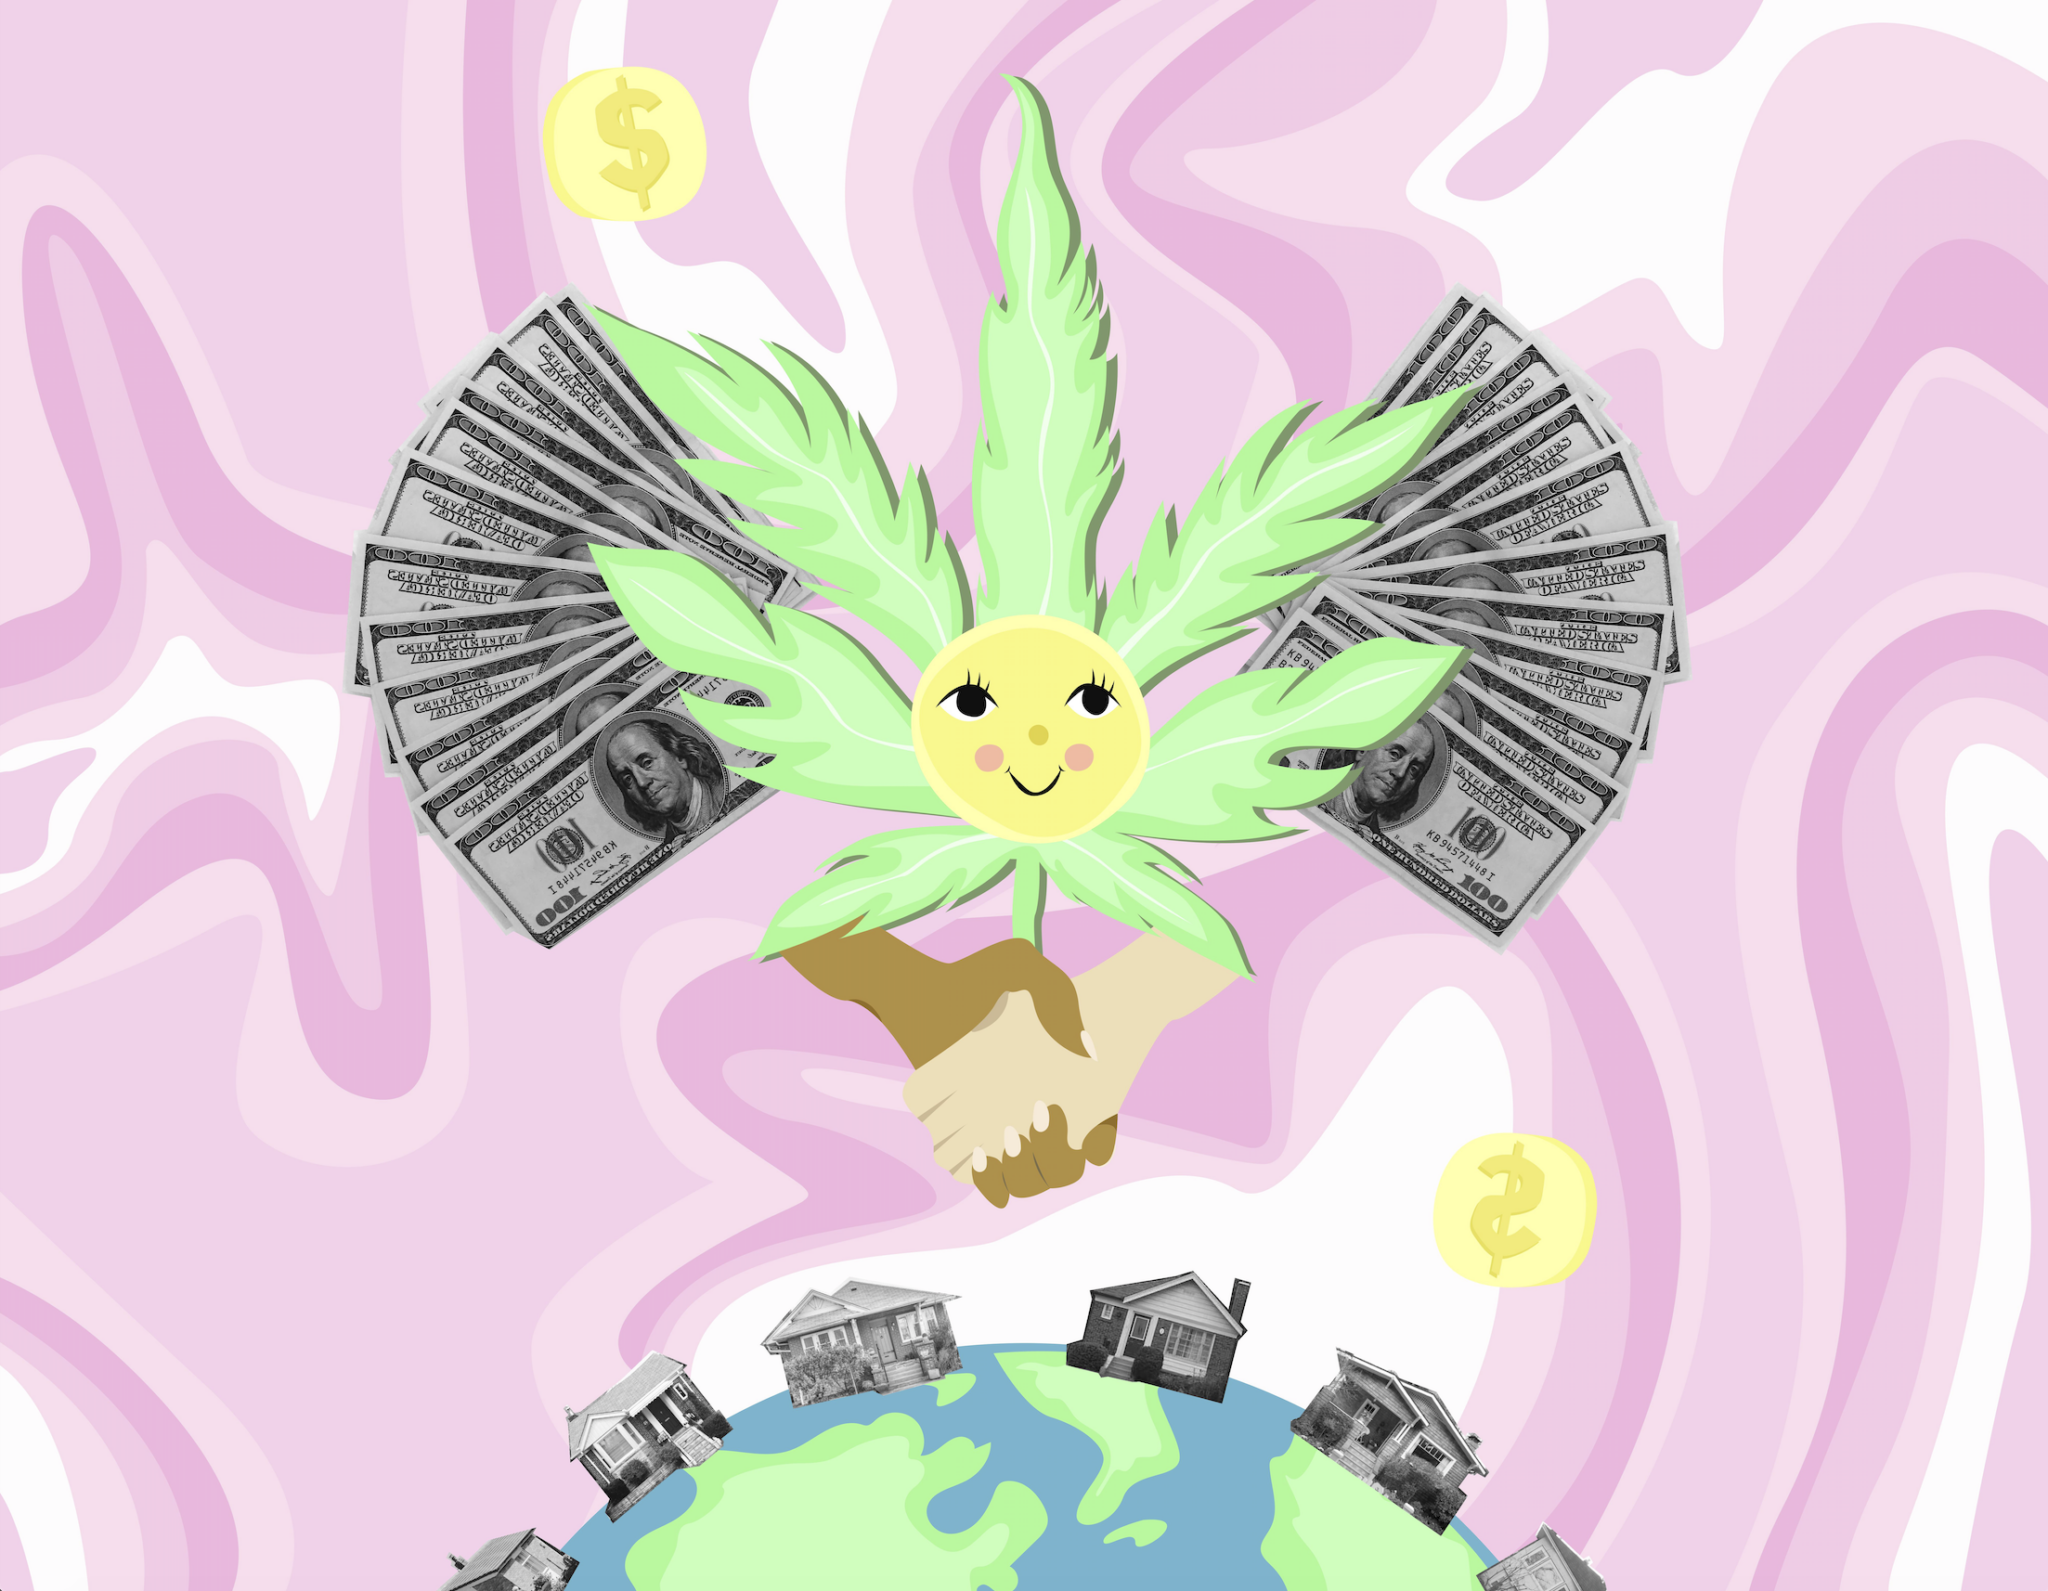 Illustration of a marijuana leaf with a smiley face in the center, surrounded by two hands shaking and photographs of $100 bills. At the bottom, photographs of houses line the Earth.